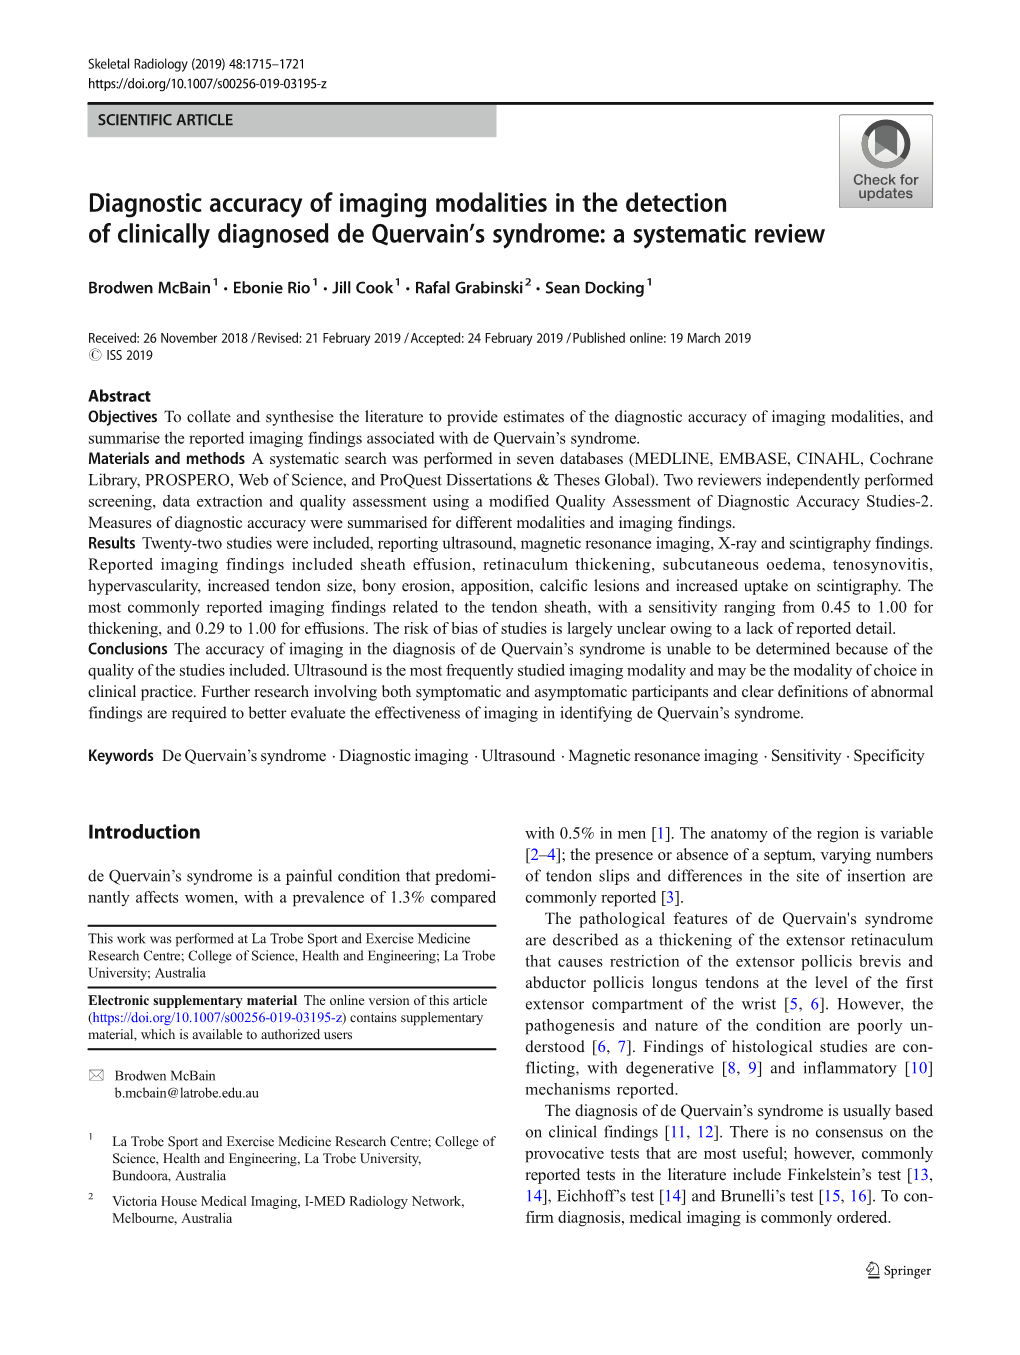 Diagnostic Accuracy of Imaging Modalities in the Detection of Clinically Diagnosed De Quervain’S Syndrome: a Systematic Review